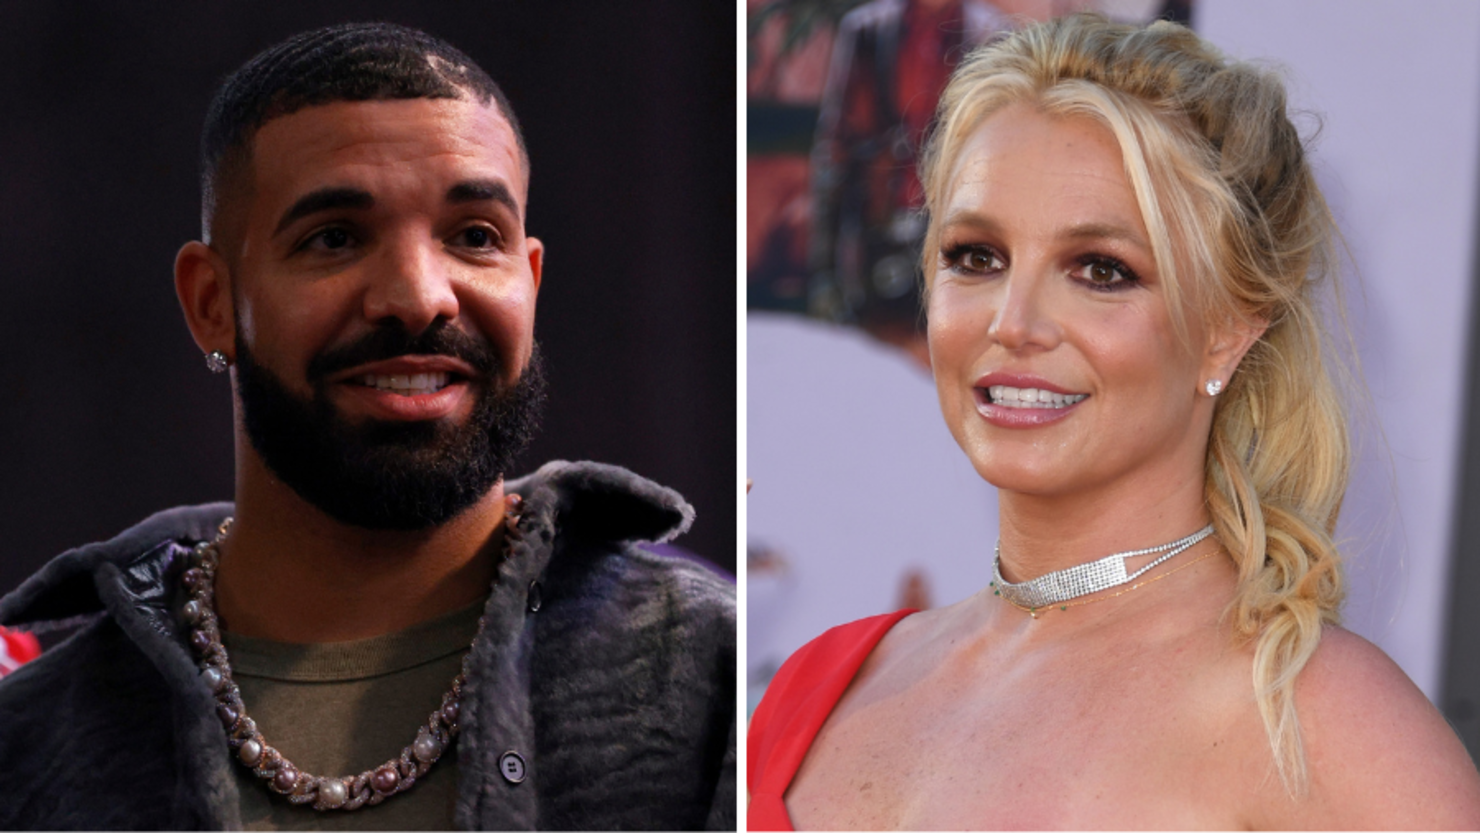 Drake and Britney Spears